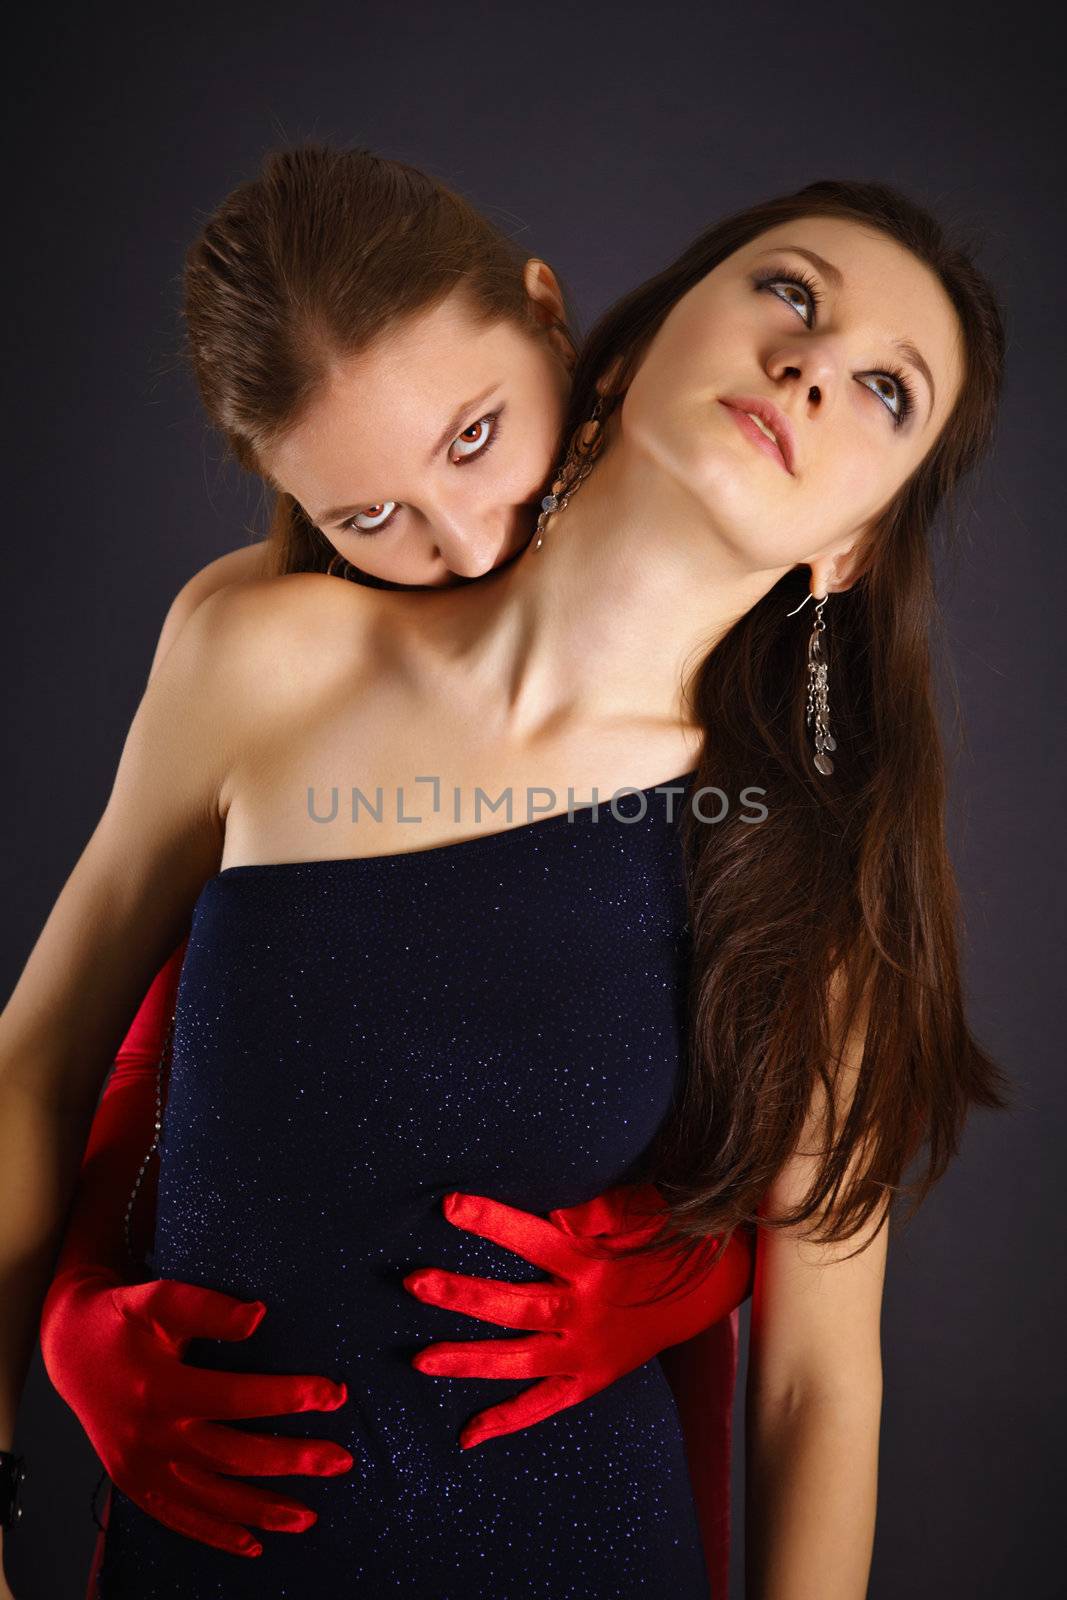 Two young girls portrayed the vampire and his sacrifice on dark background